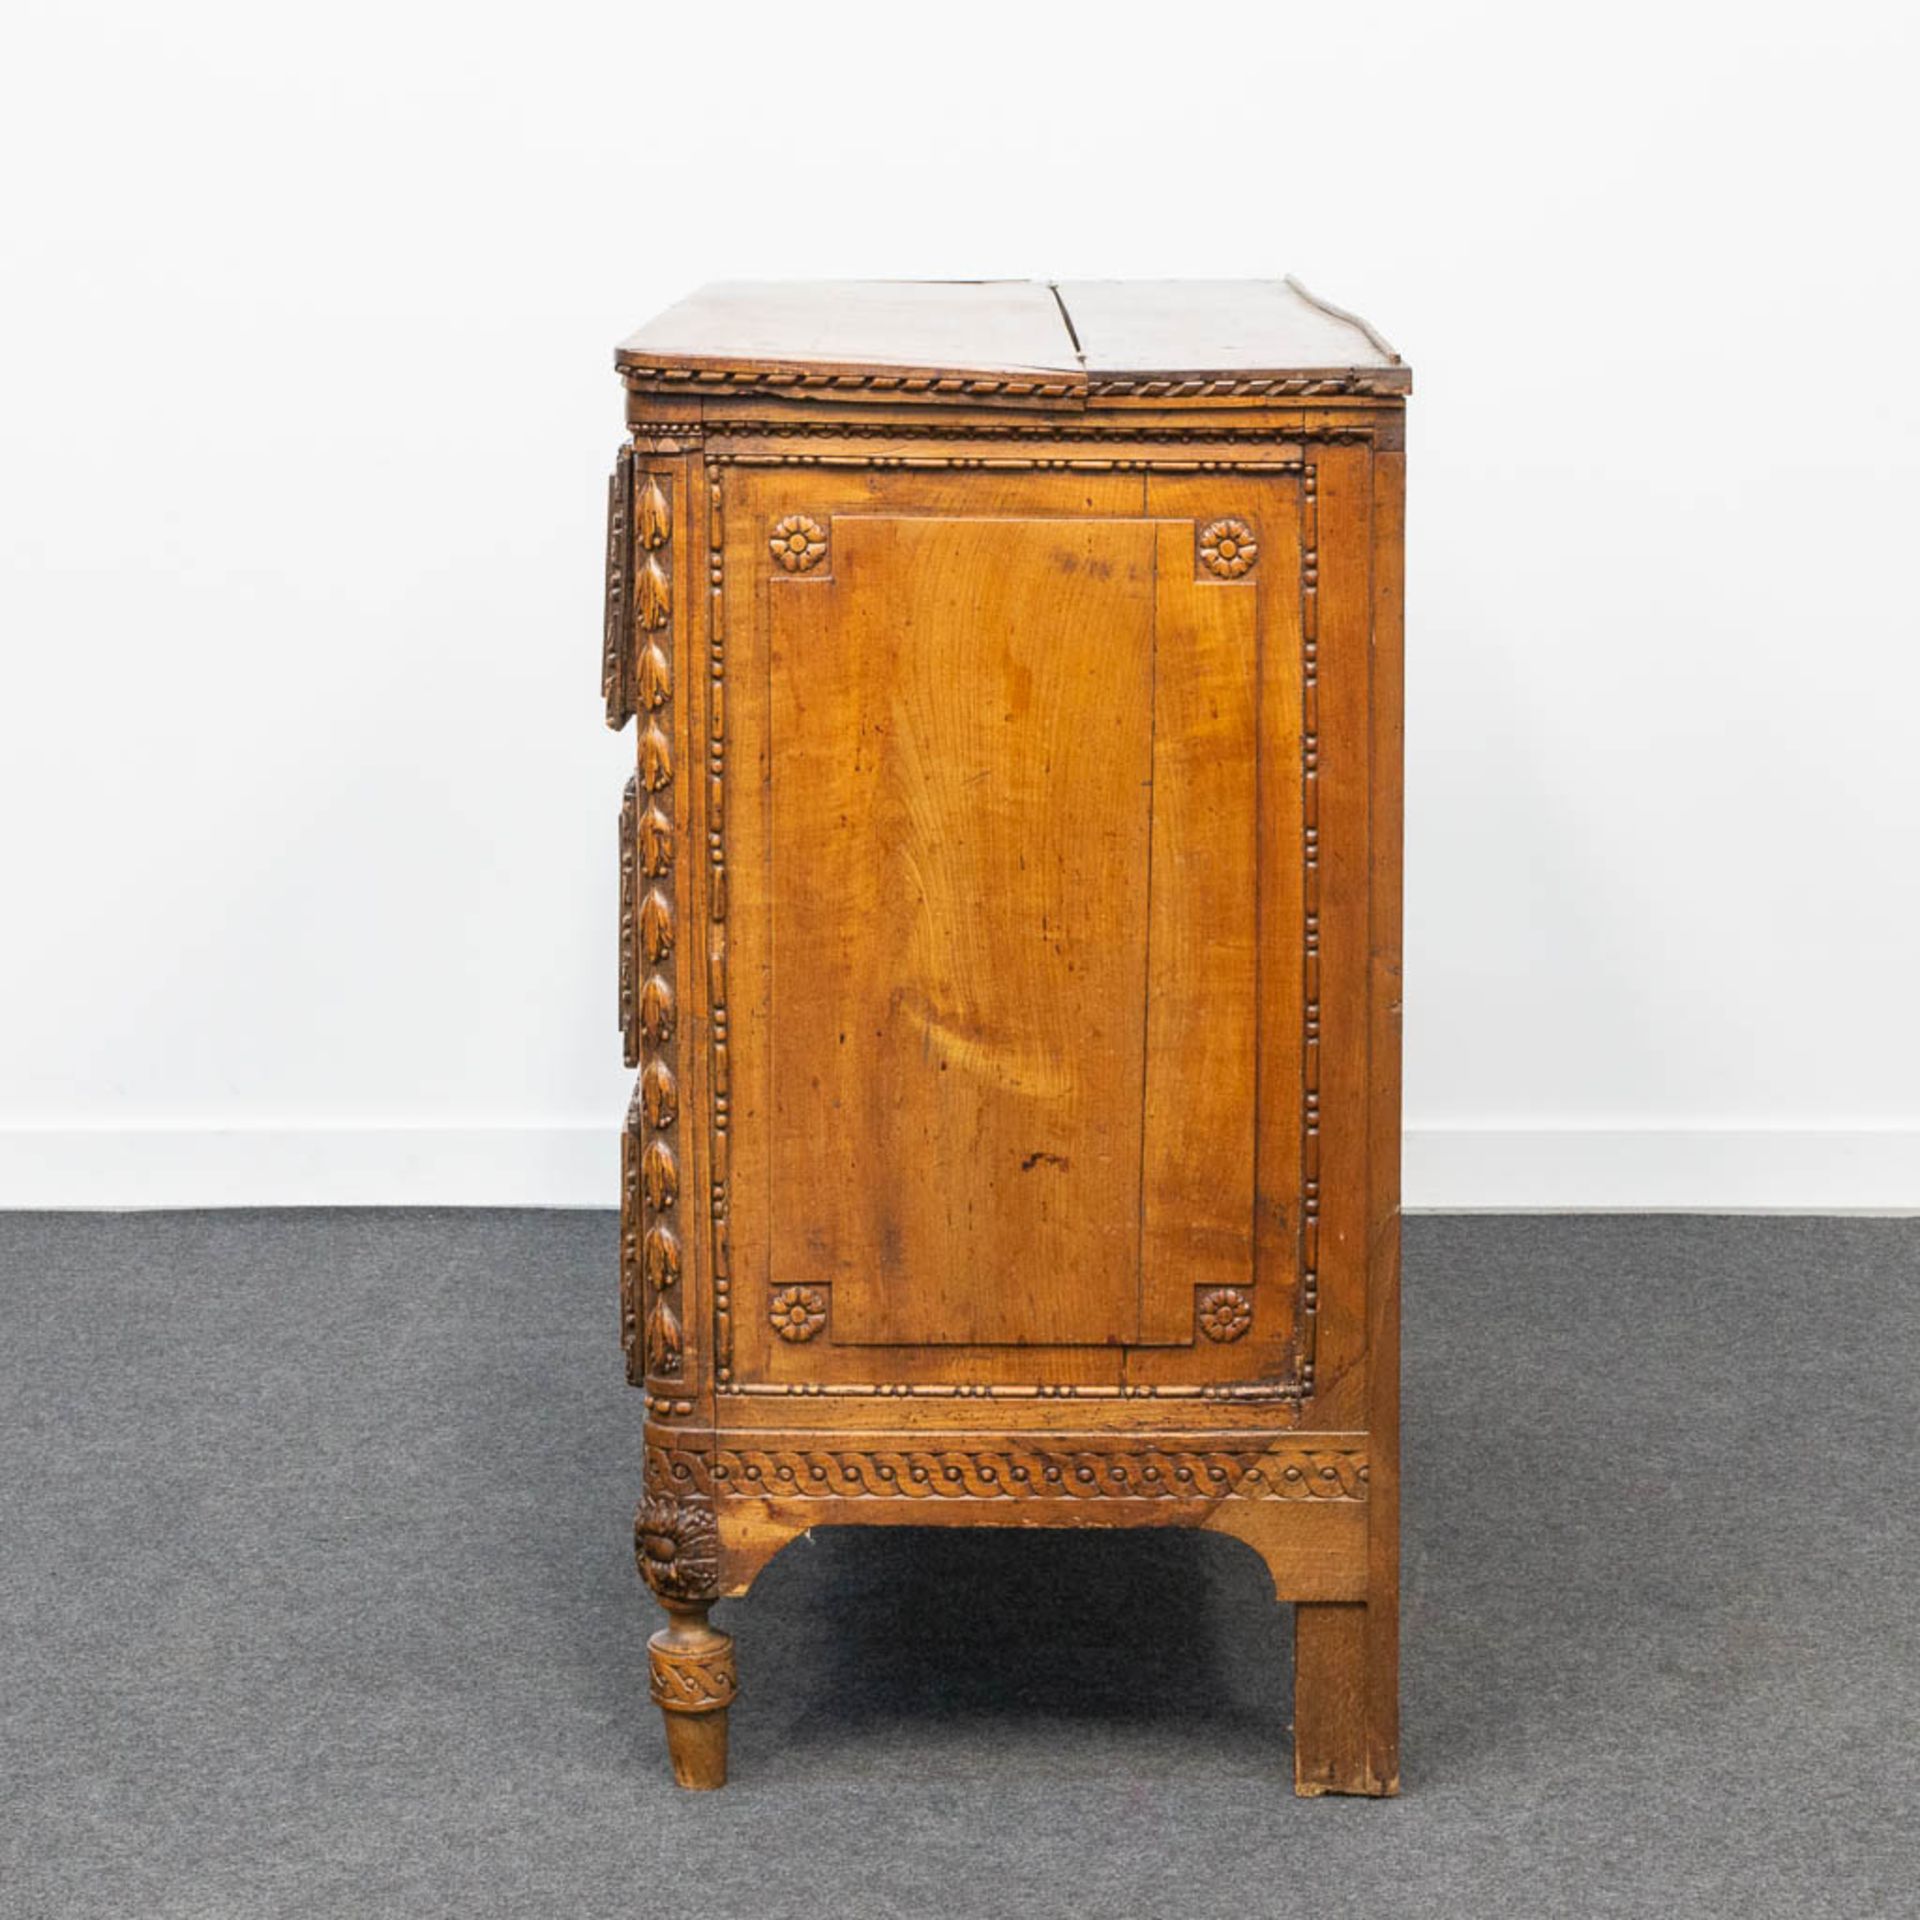 A wood sculptured commode in Louis XVI style, with 3 drawers and a hidden desk. 18th century. - Image 6 of 23